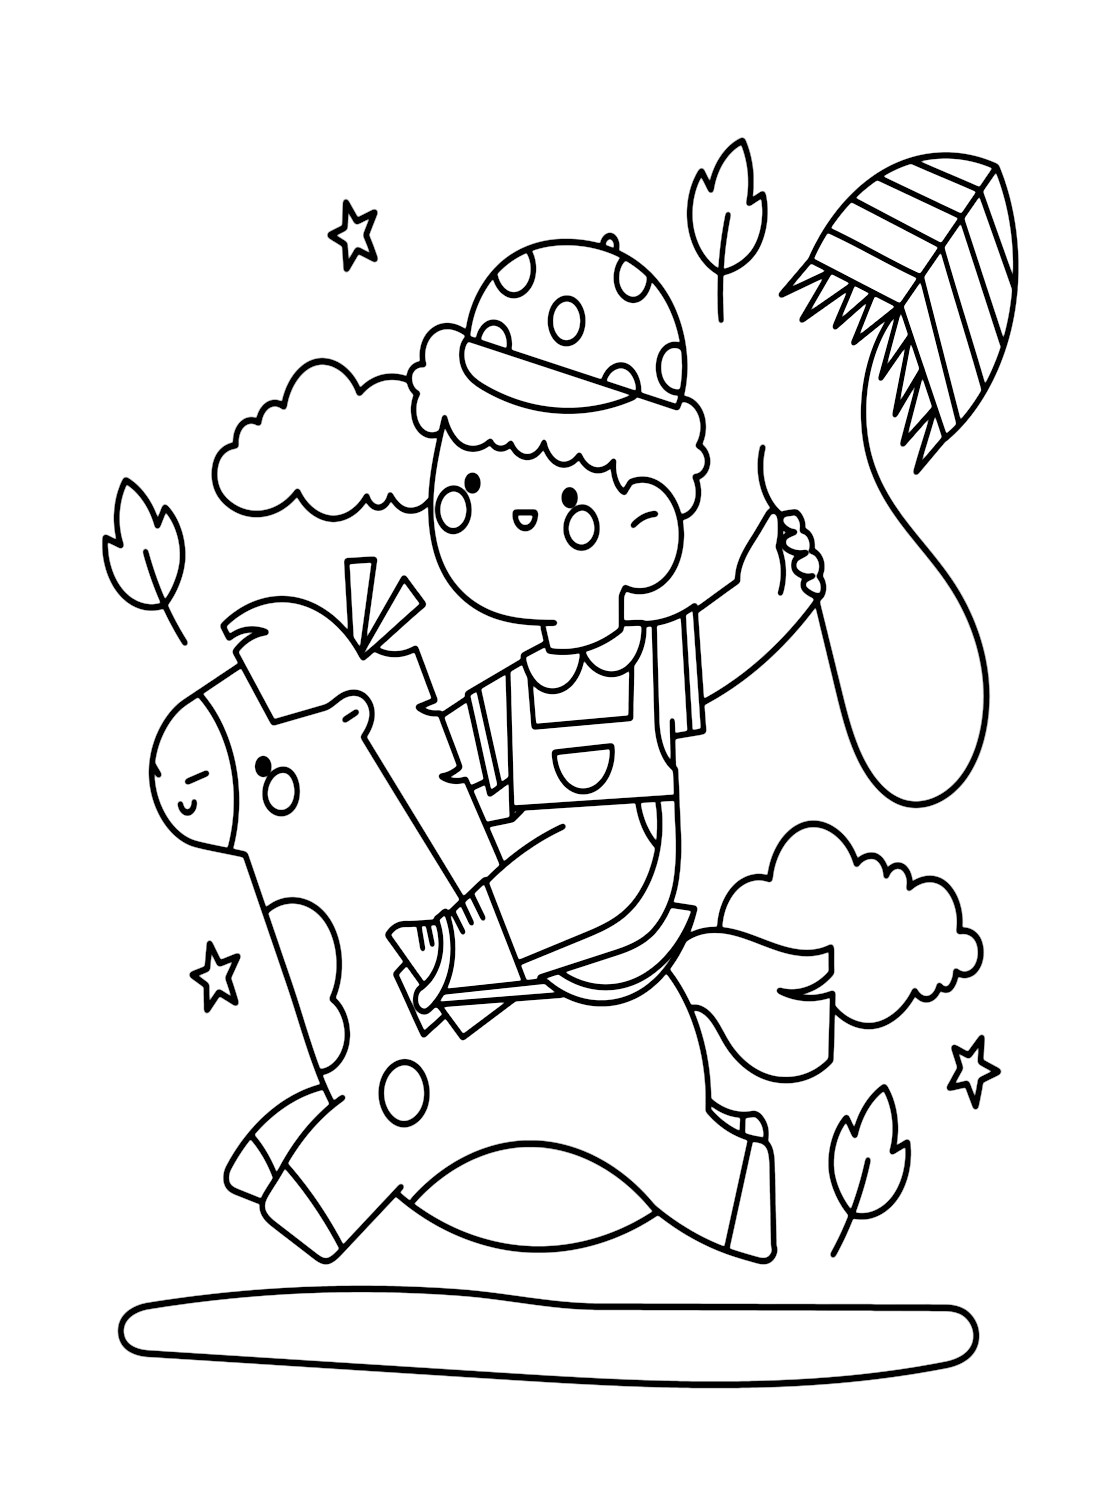 Boy Riding Horse Flying Kite Coloring Page